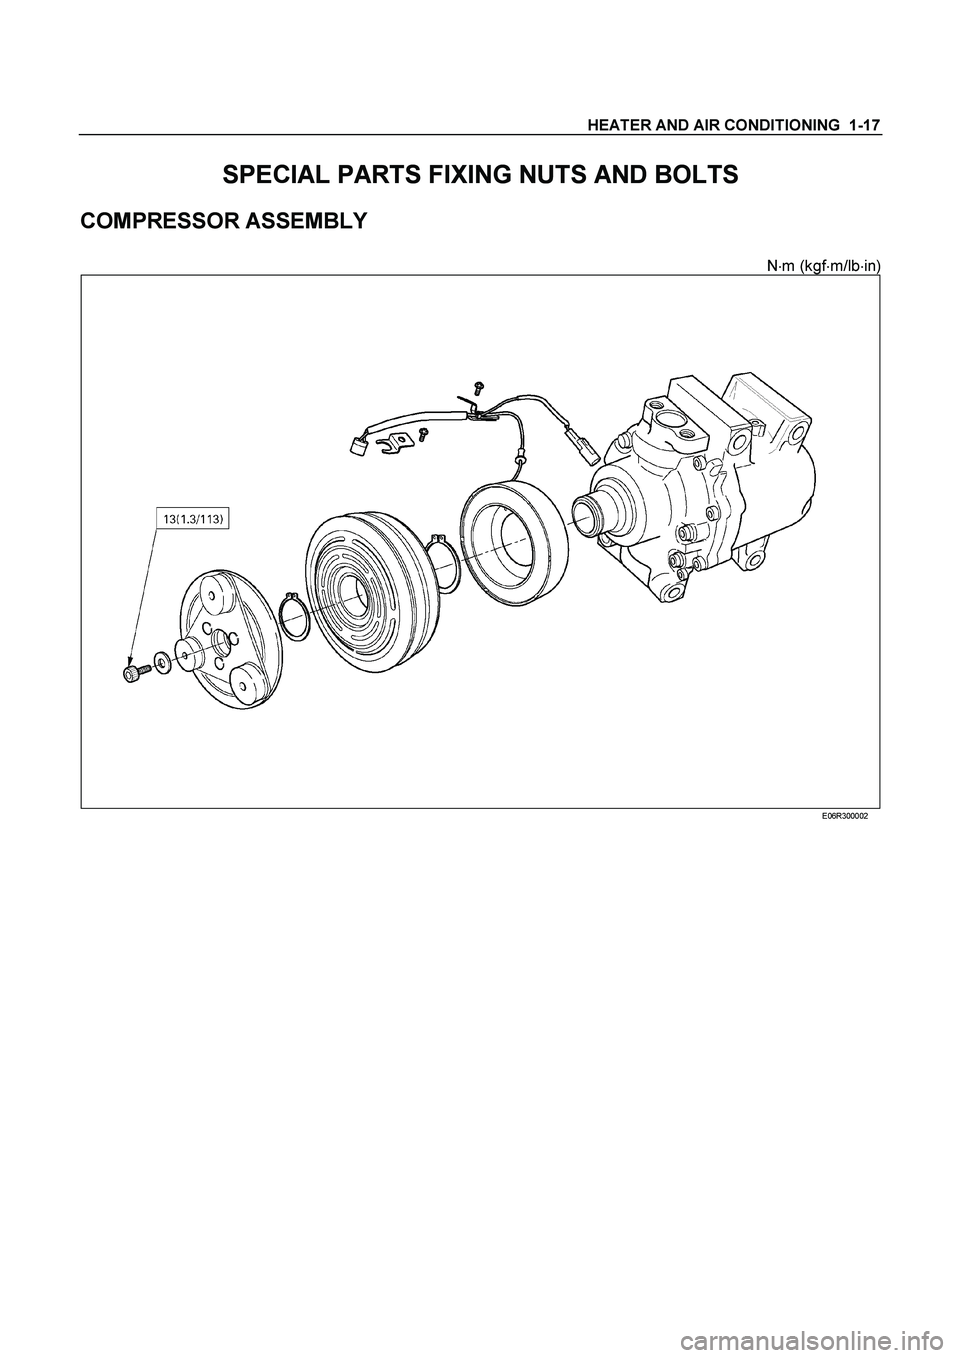 ISUZU TF SERIES 2004  Workshop Manual HEATER AND AIR CONDITIONING  1-17 
SPECIAL PARTS FIXING NUTS AND BOLTS 
COMPRESSOR ASSEMBLY 
 
N
m (kgf
m/lb
in) 
  
  E06R300002  